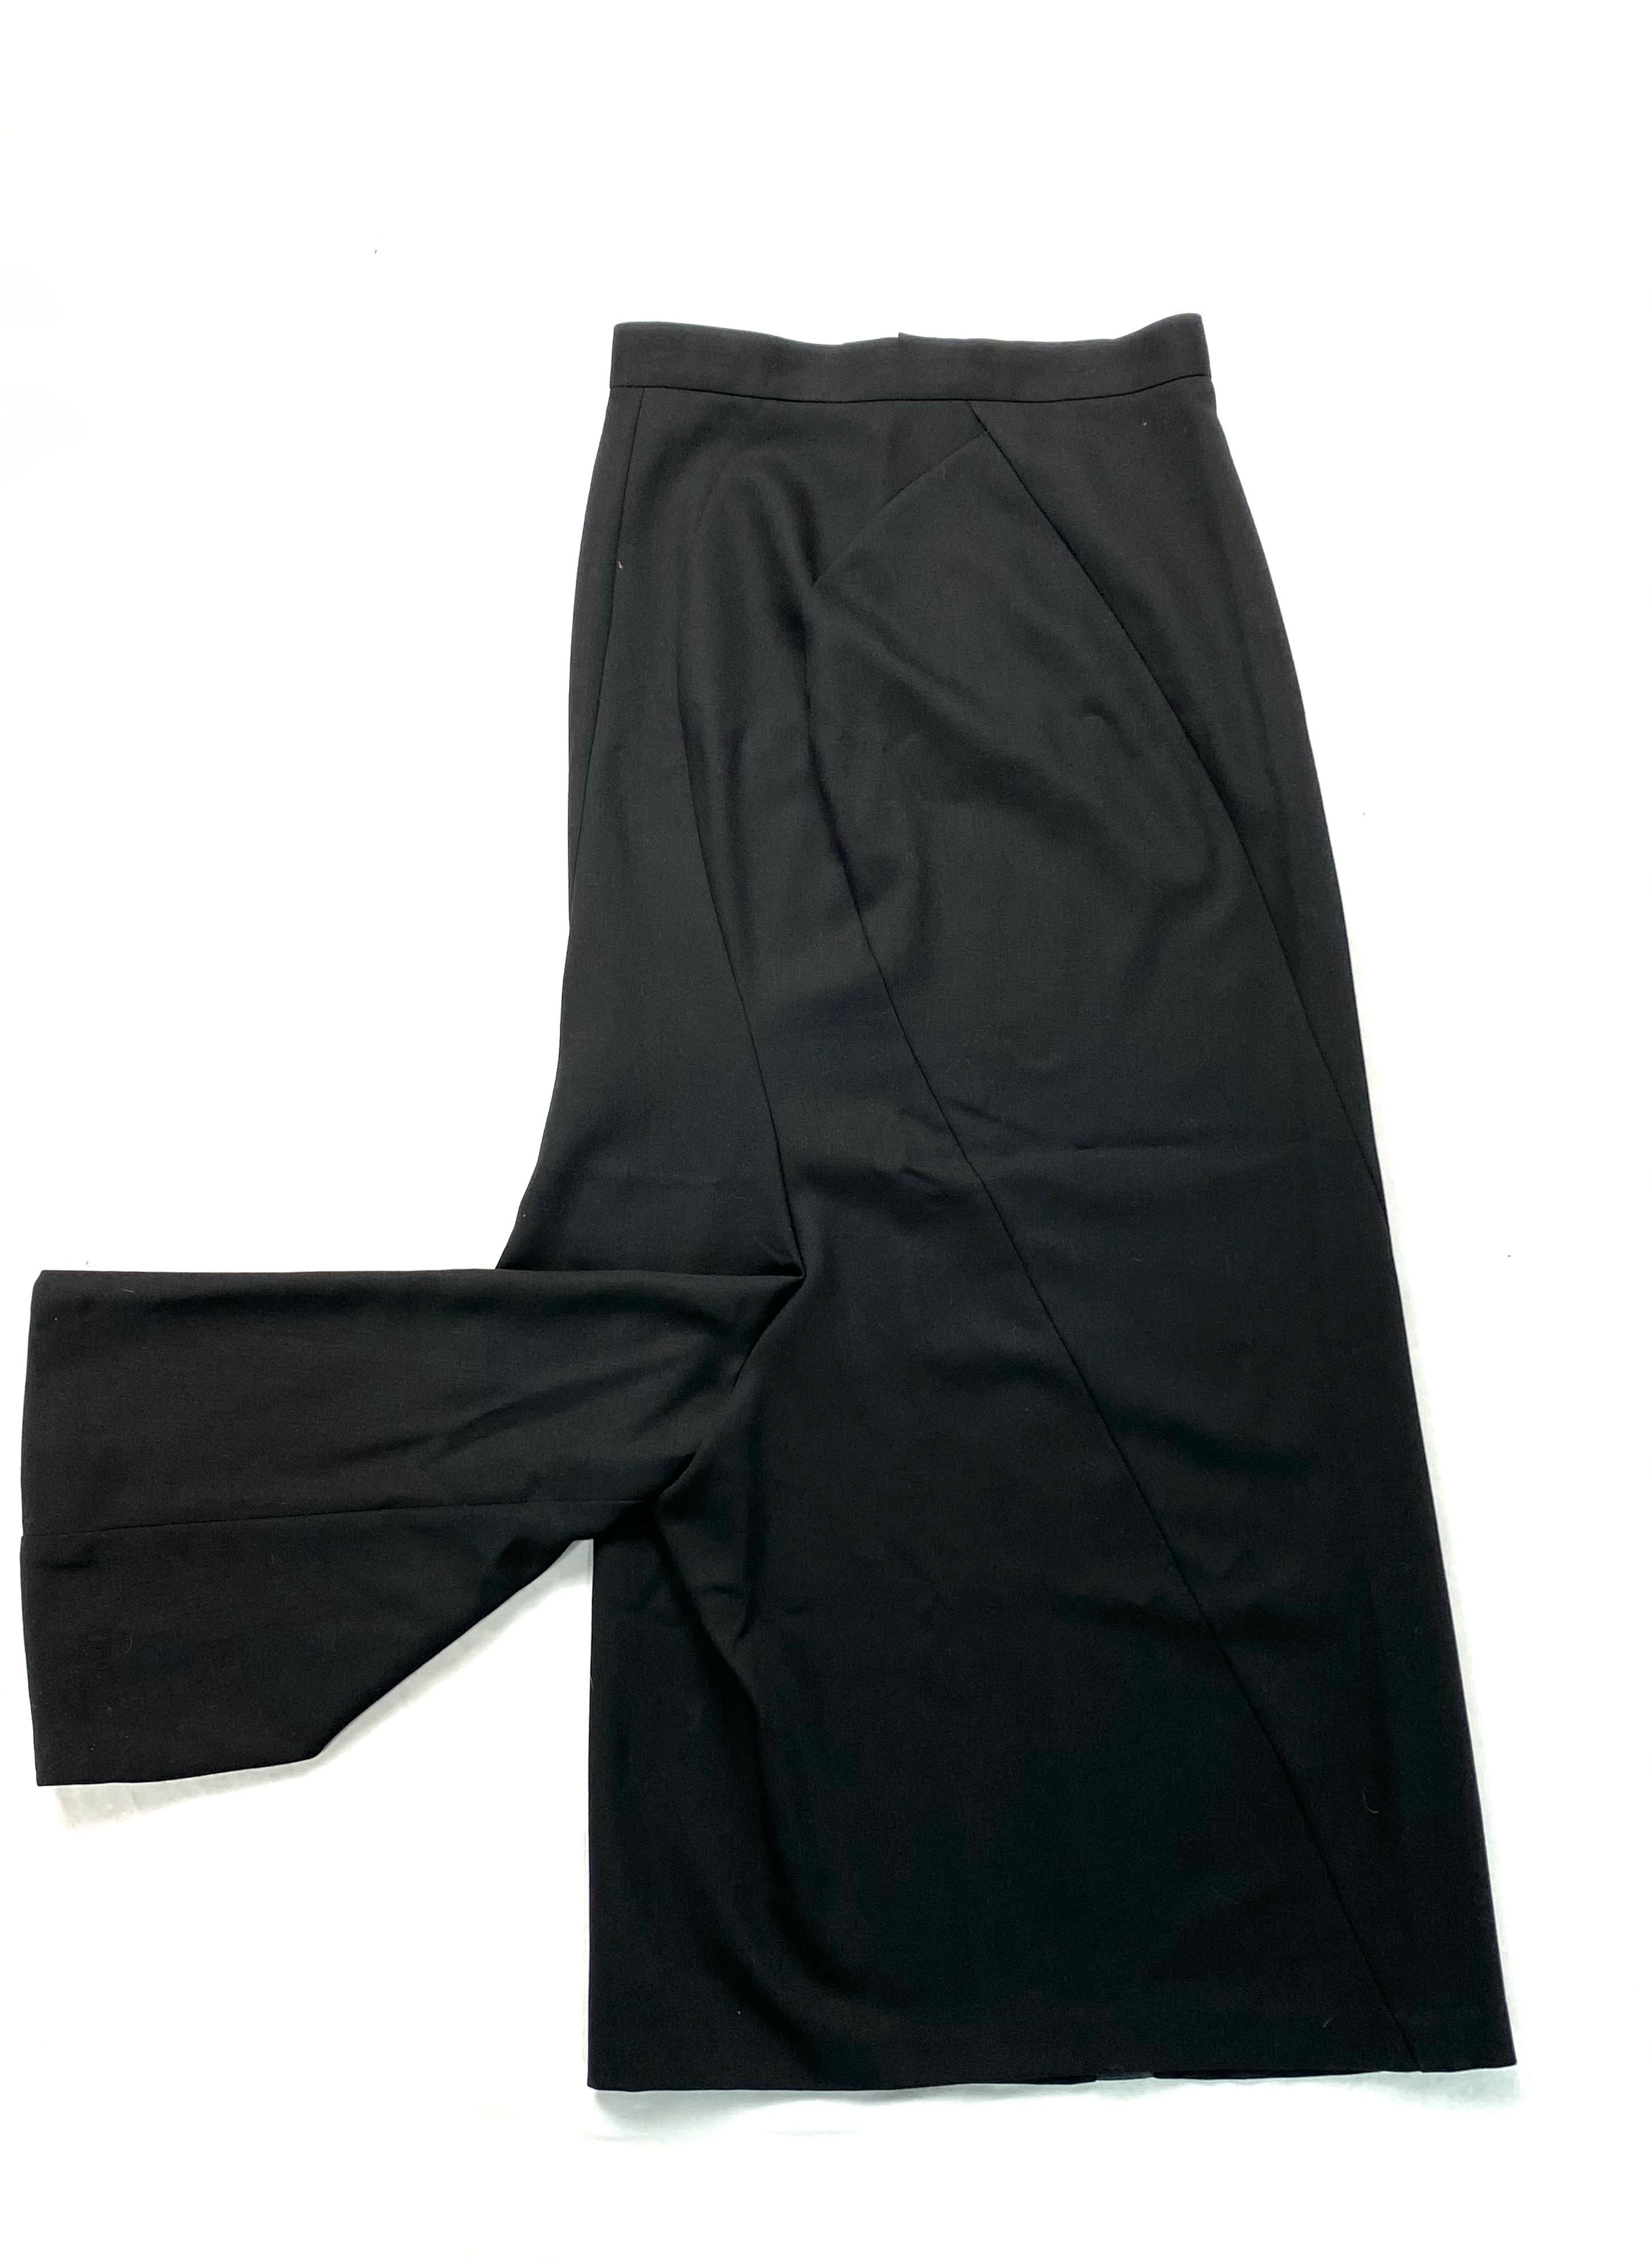 Product details:

Featuring maxi length skirt with rear zip and hook closure and black silk ribbon detail design on the back.
Made in Japan.